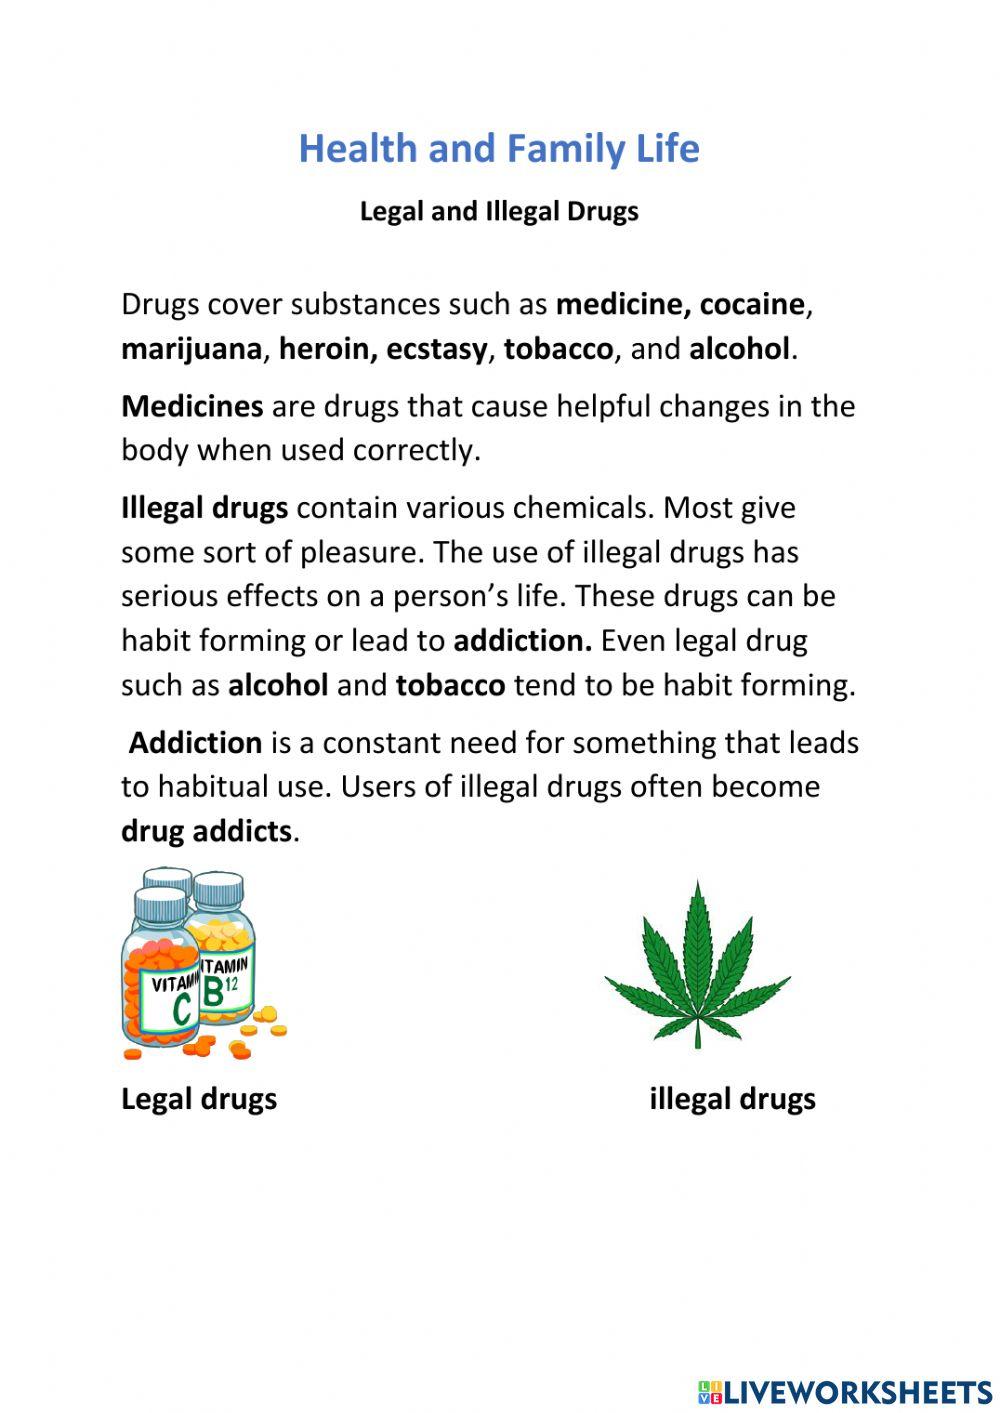 Legal and Illegal Drugs- Notes